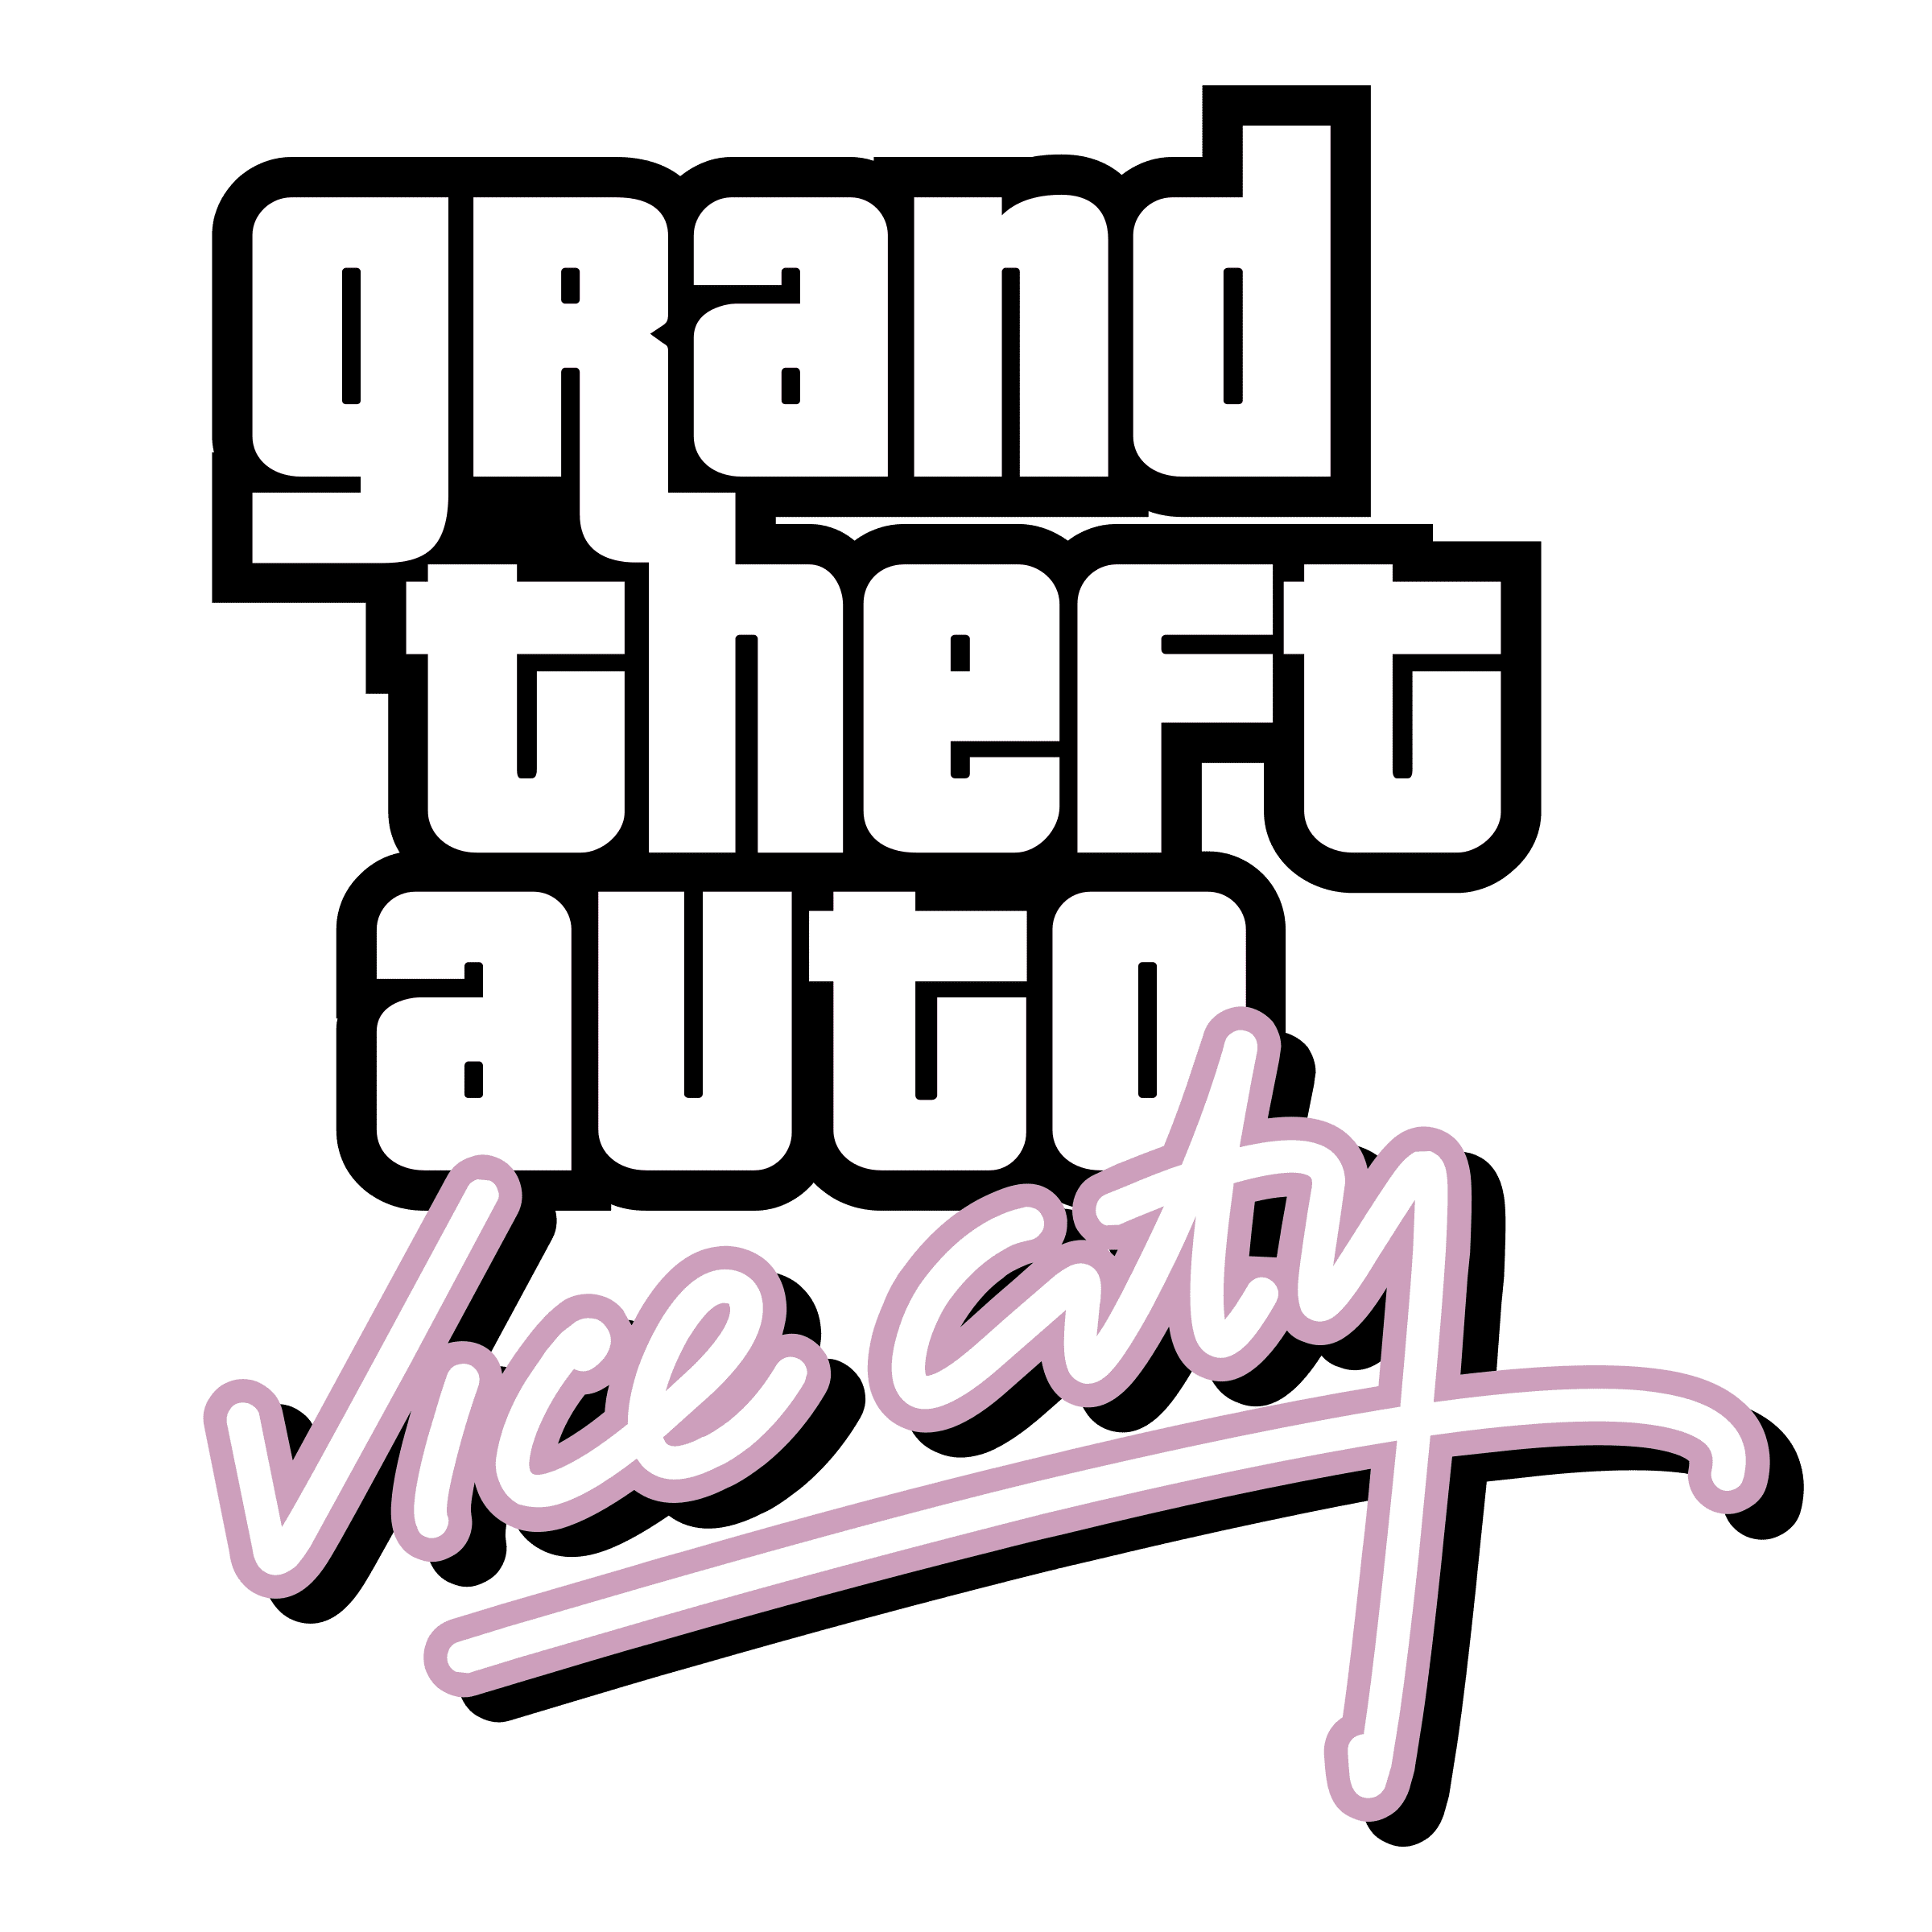 vice city Download GTA Vice City APK from Mediafire Now!